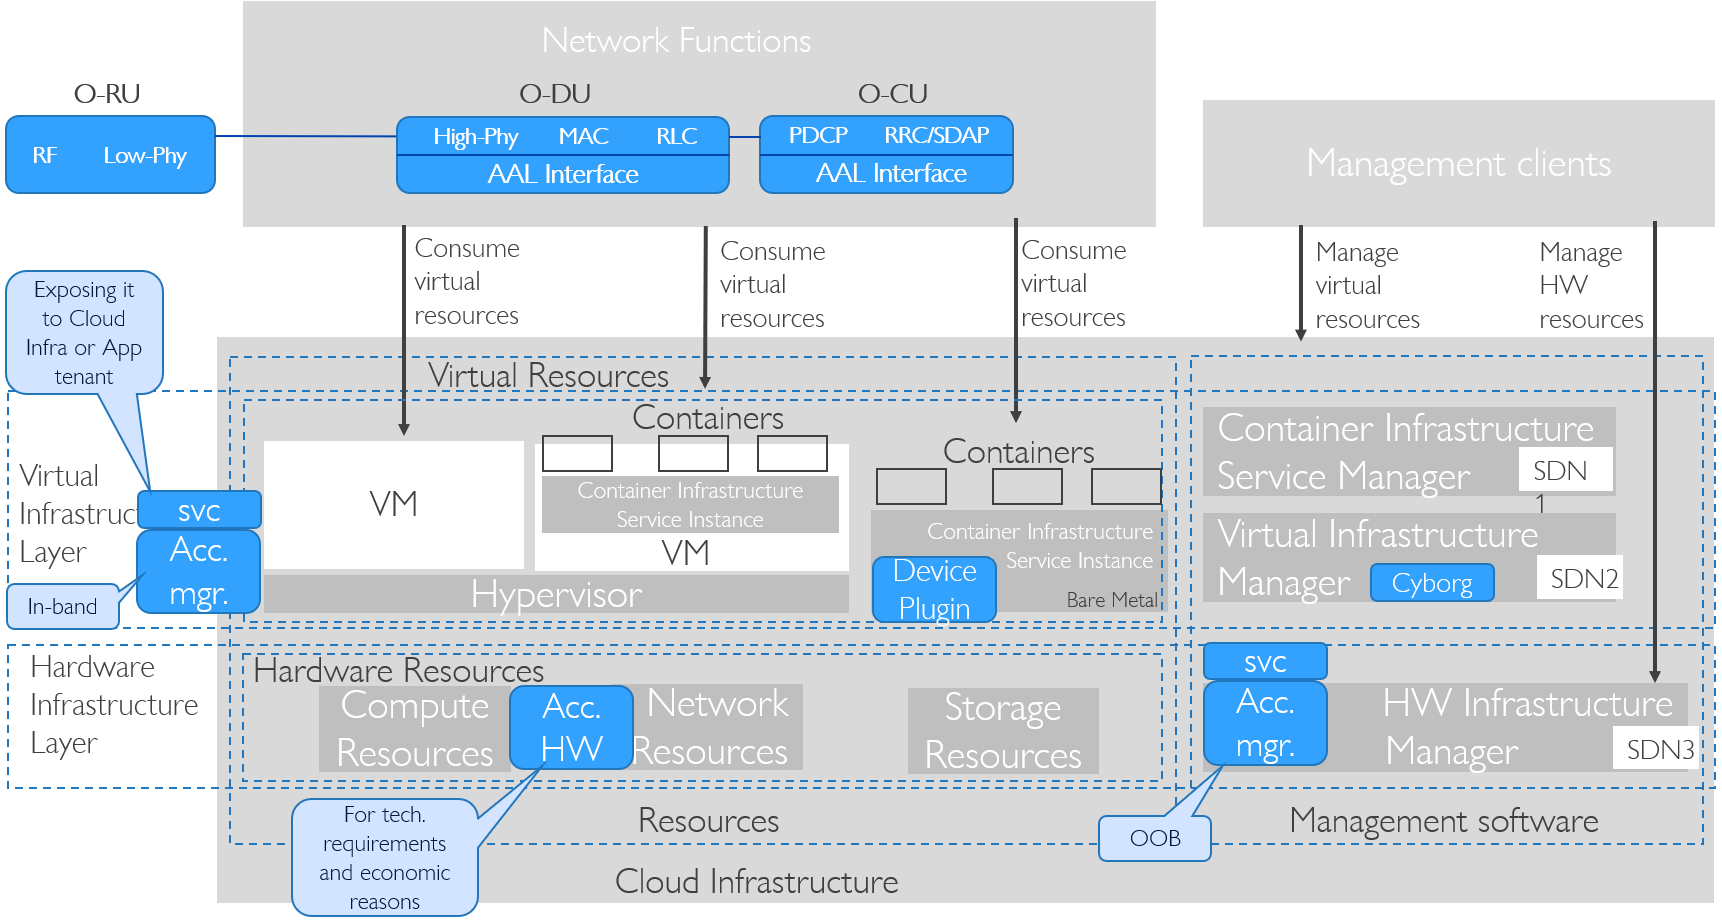 "AAL Interface in RM Realization Diagram"